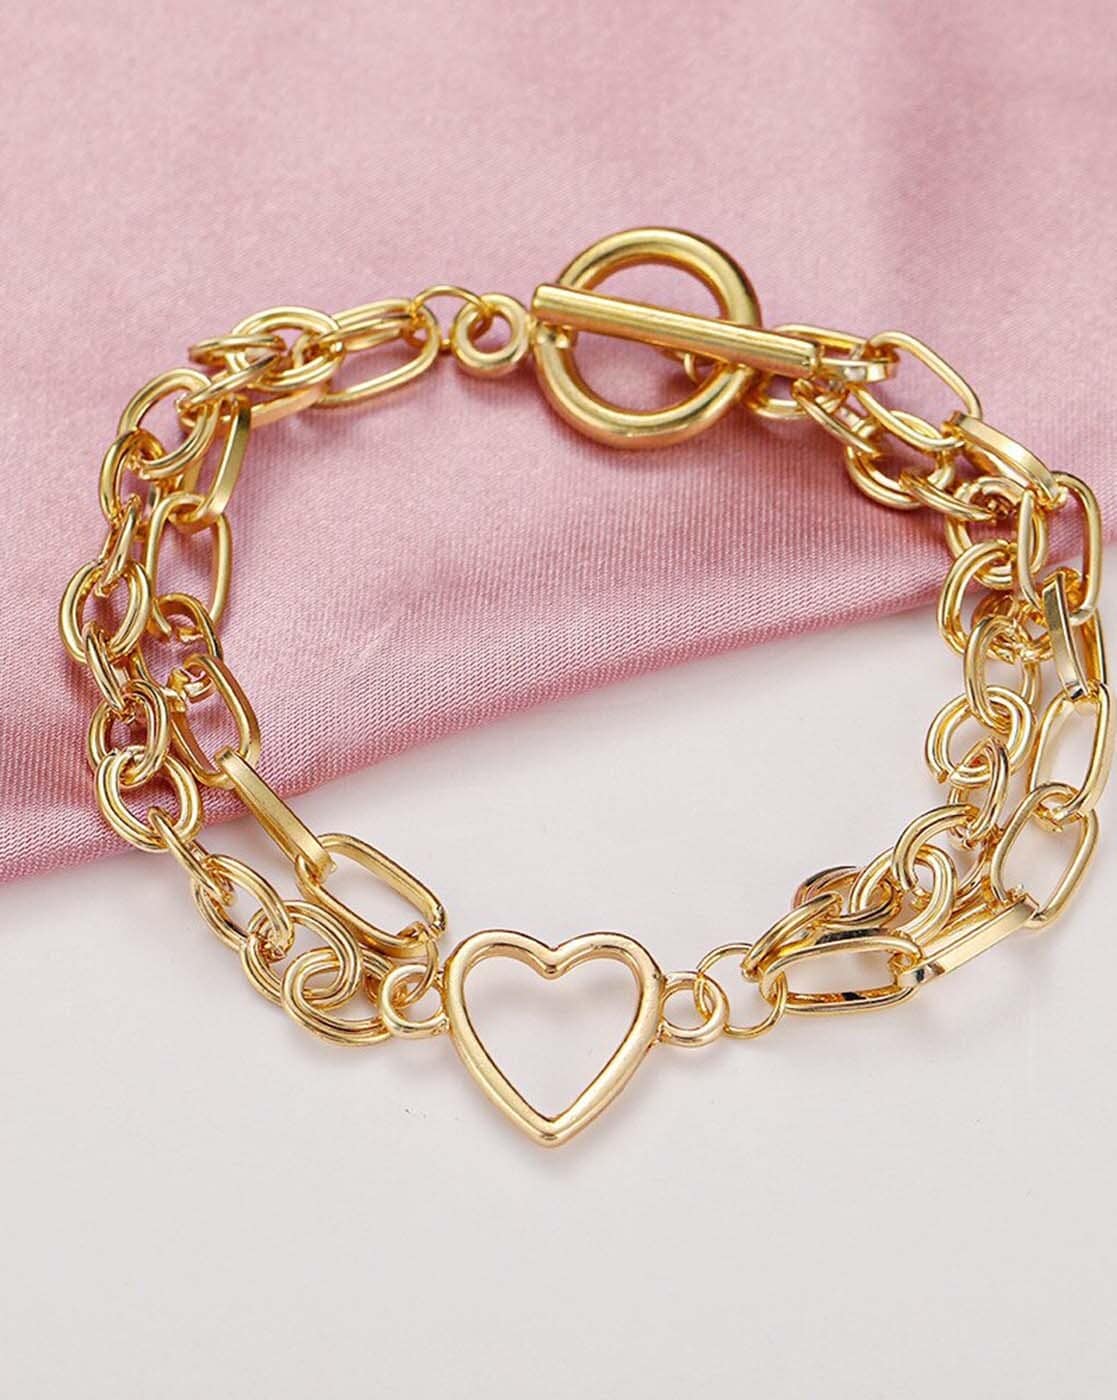 Gold Filled Paper Clip Bracelet with Enamel Heart Charm – H&R Fashion  Jewelry